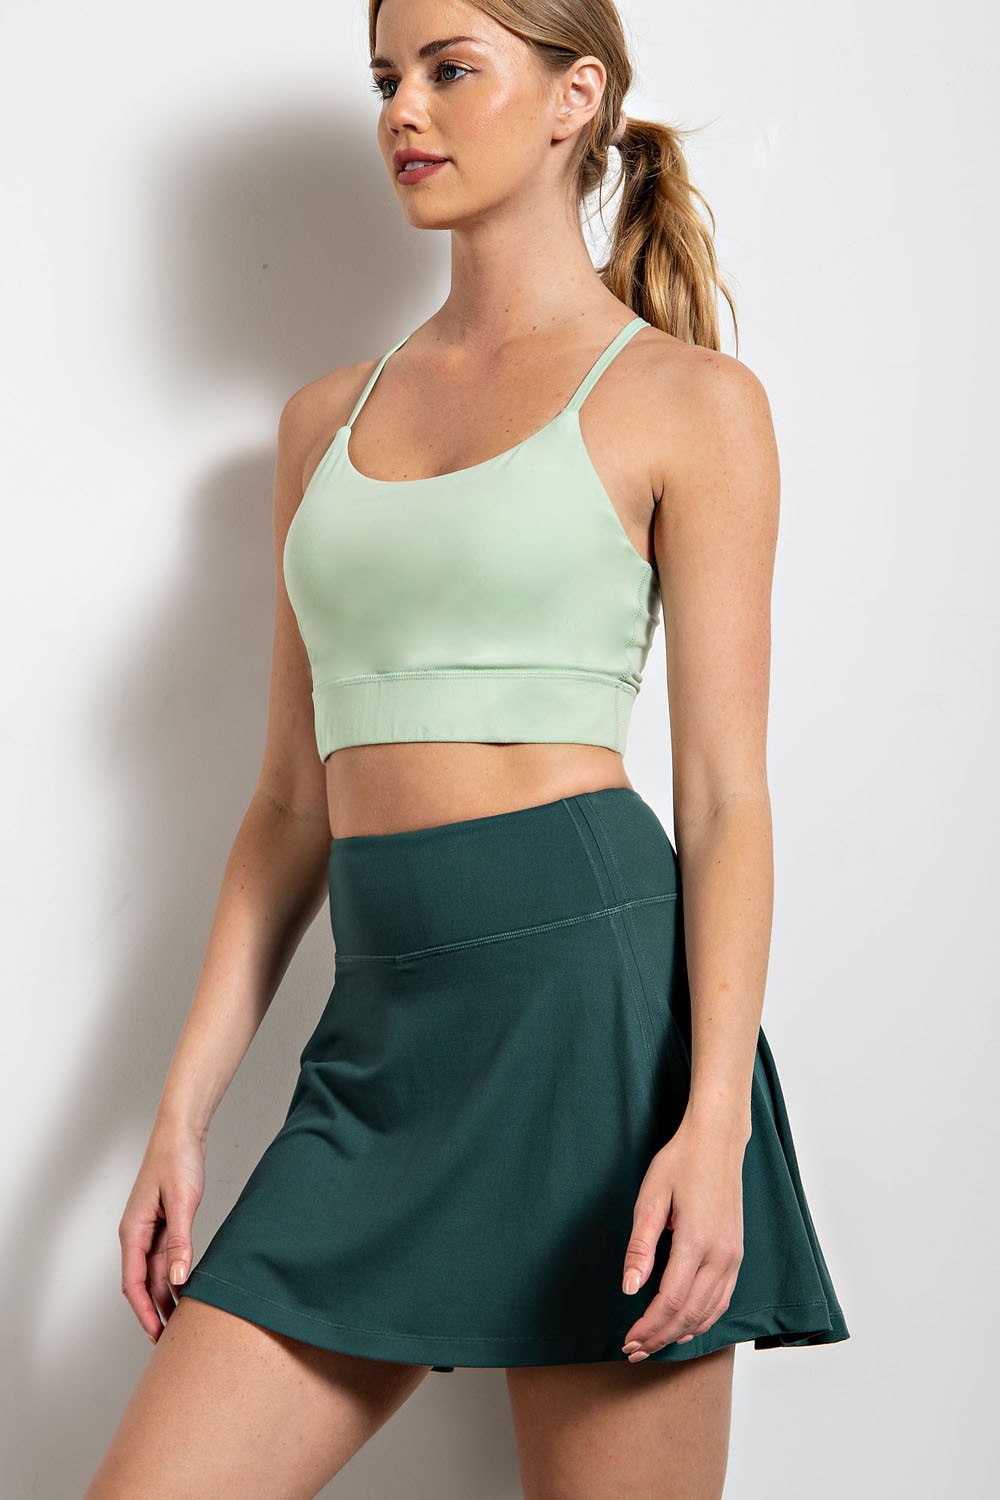 What About It Evergreen Pleated Athletic Skirt – Dixieland Boutique